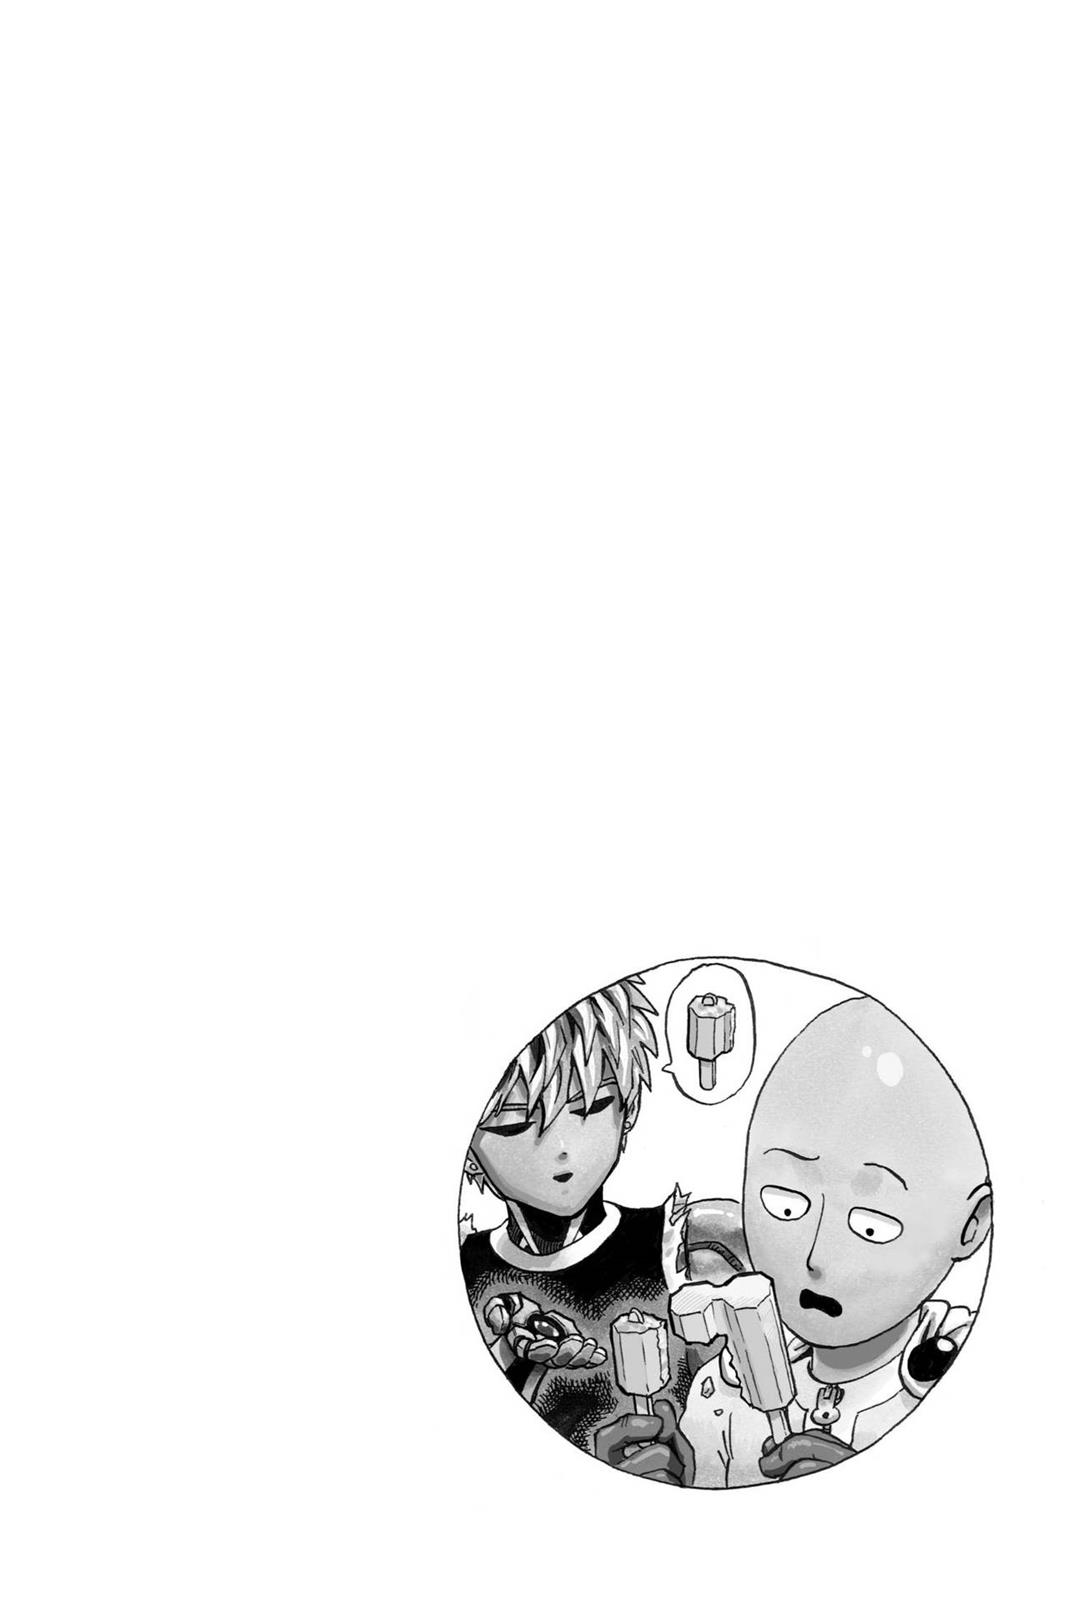 One-Punch Man, Punch 66 image 26